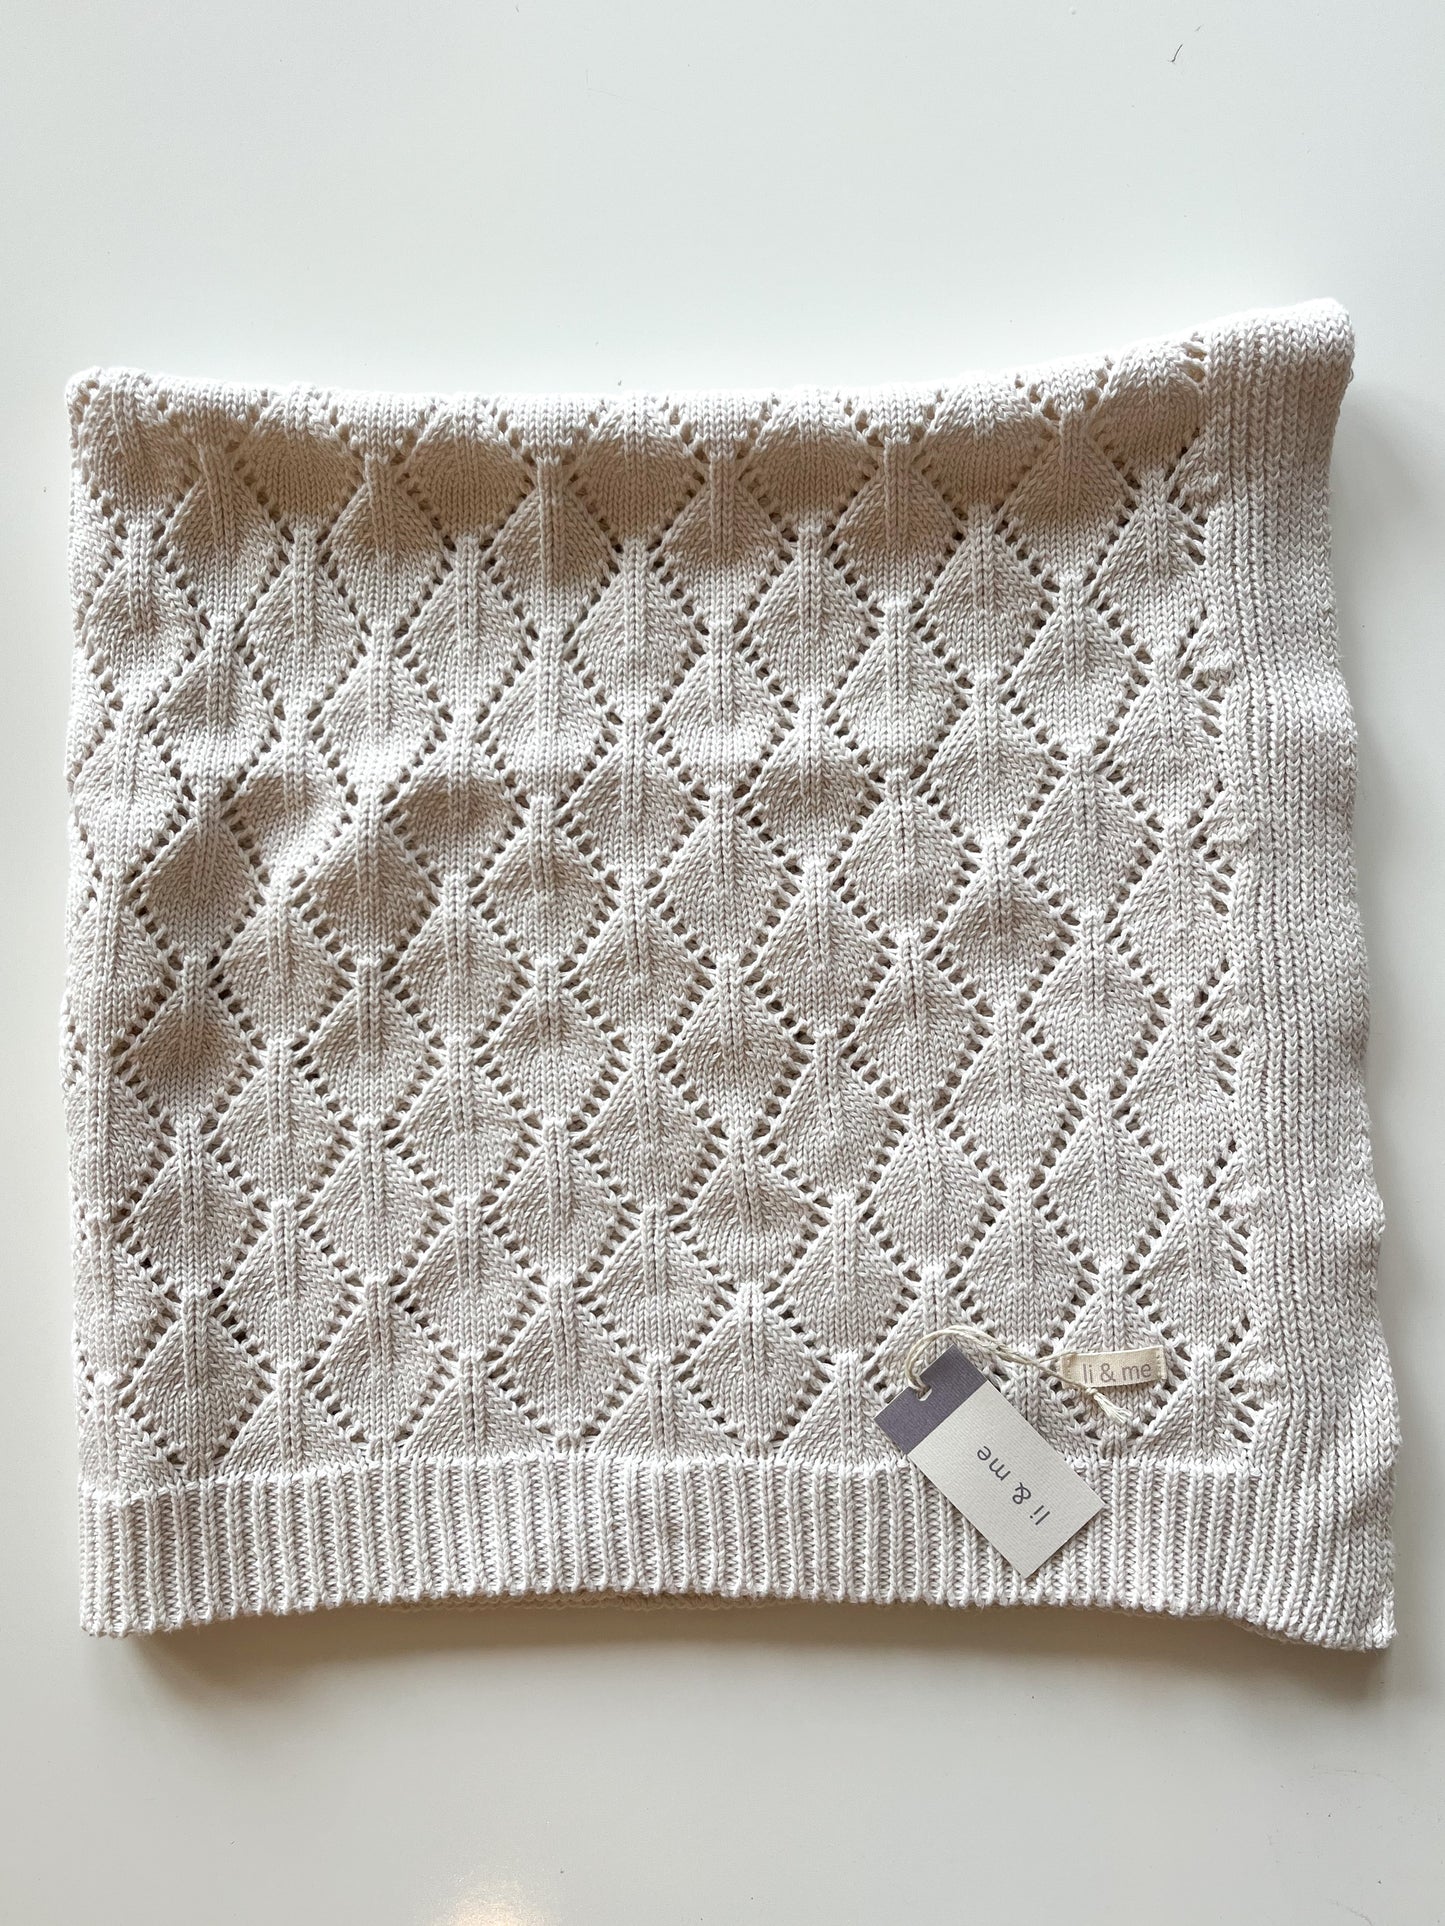 Knit Blanket - Cream Perforated